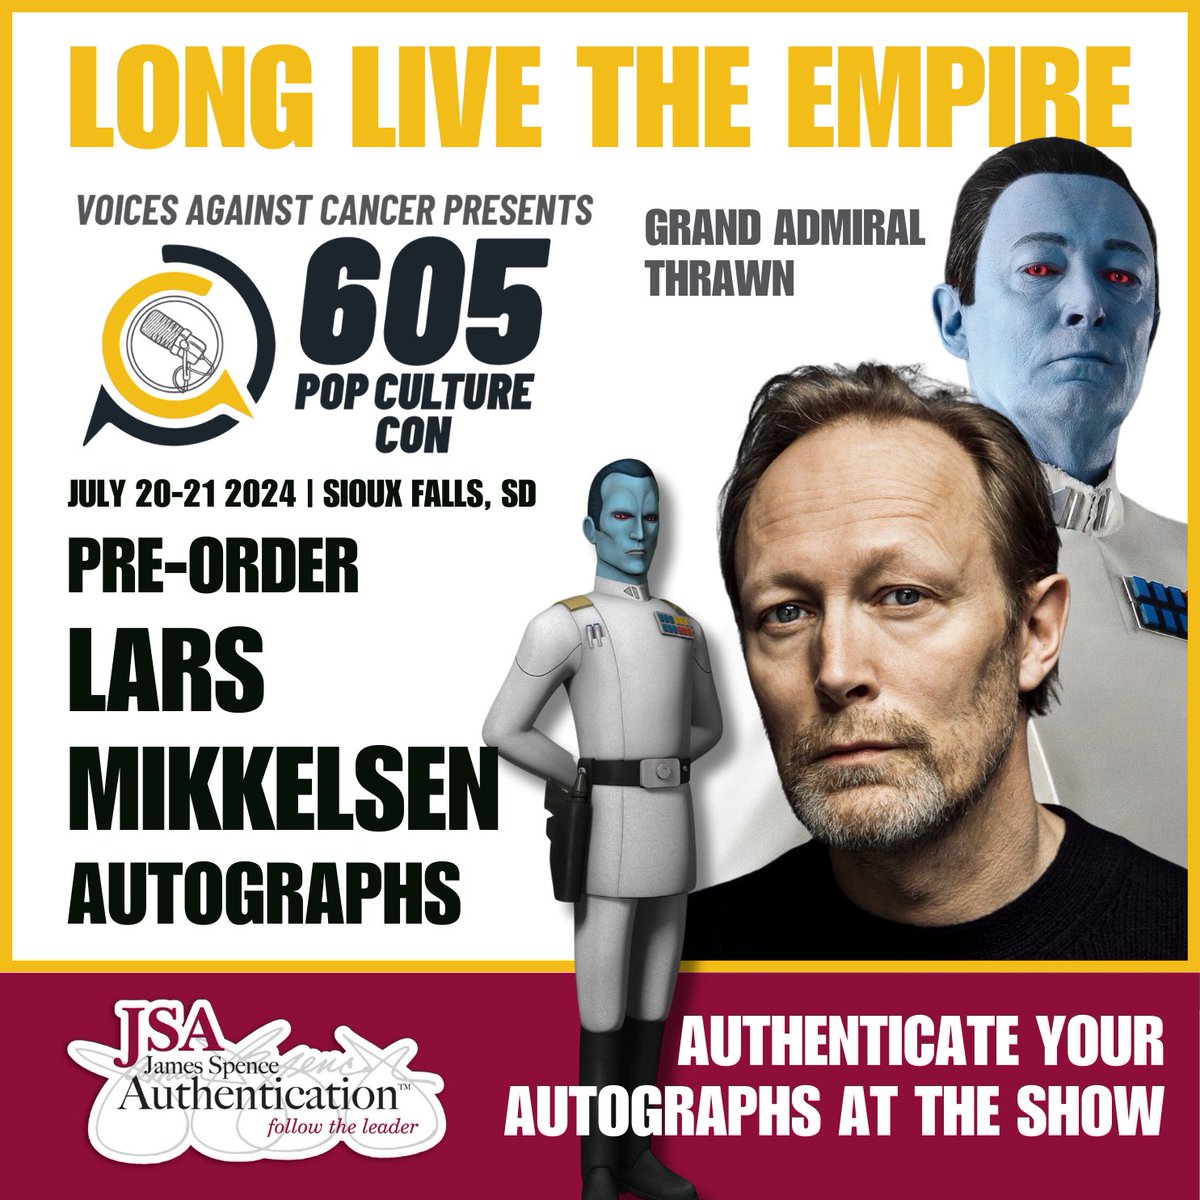 Get ahead of those rebel scum and purchase your Lars Mikkelsen autographs before @voicesvscancer #605popculturecon (July 20-21 2024) begins!

Visit bit.ly/VAC-Autographs to pre-order now!

Authenticate autographs obtained at the show with JSA for just $10/signature. This…